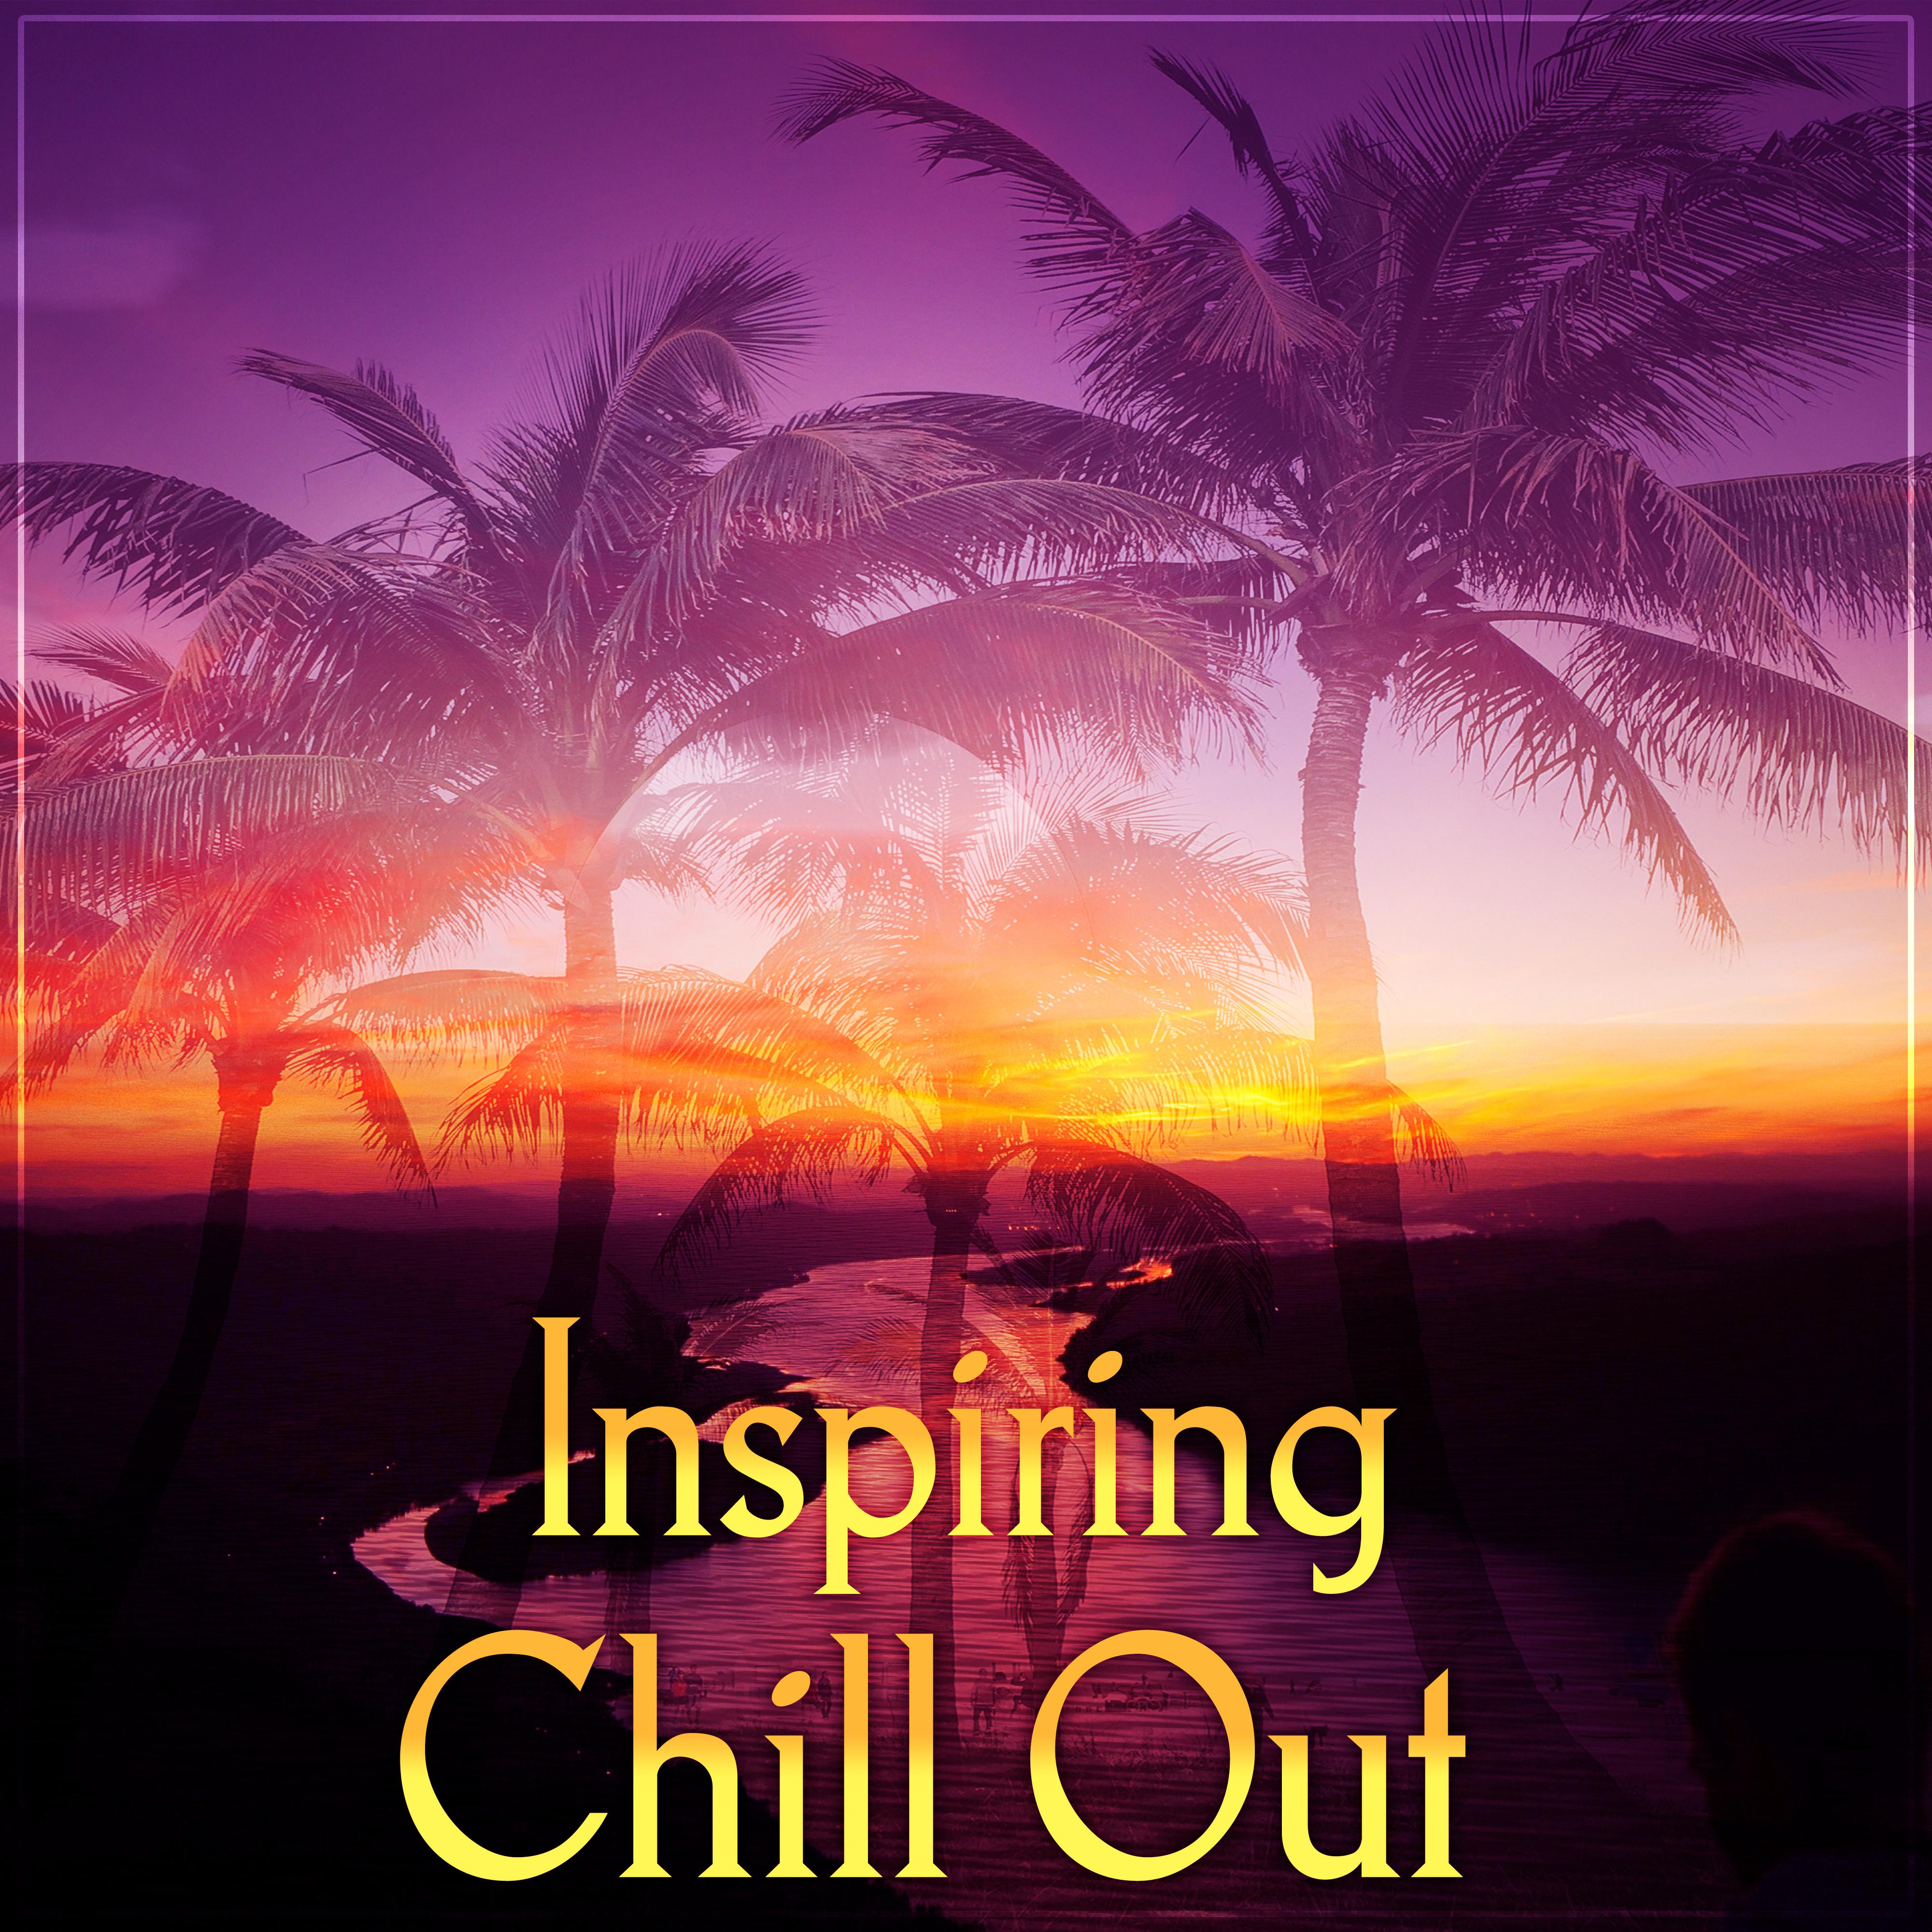 Inspiring Chill Out – Inspiring Music, Best Chill Out Sounds